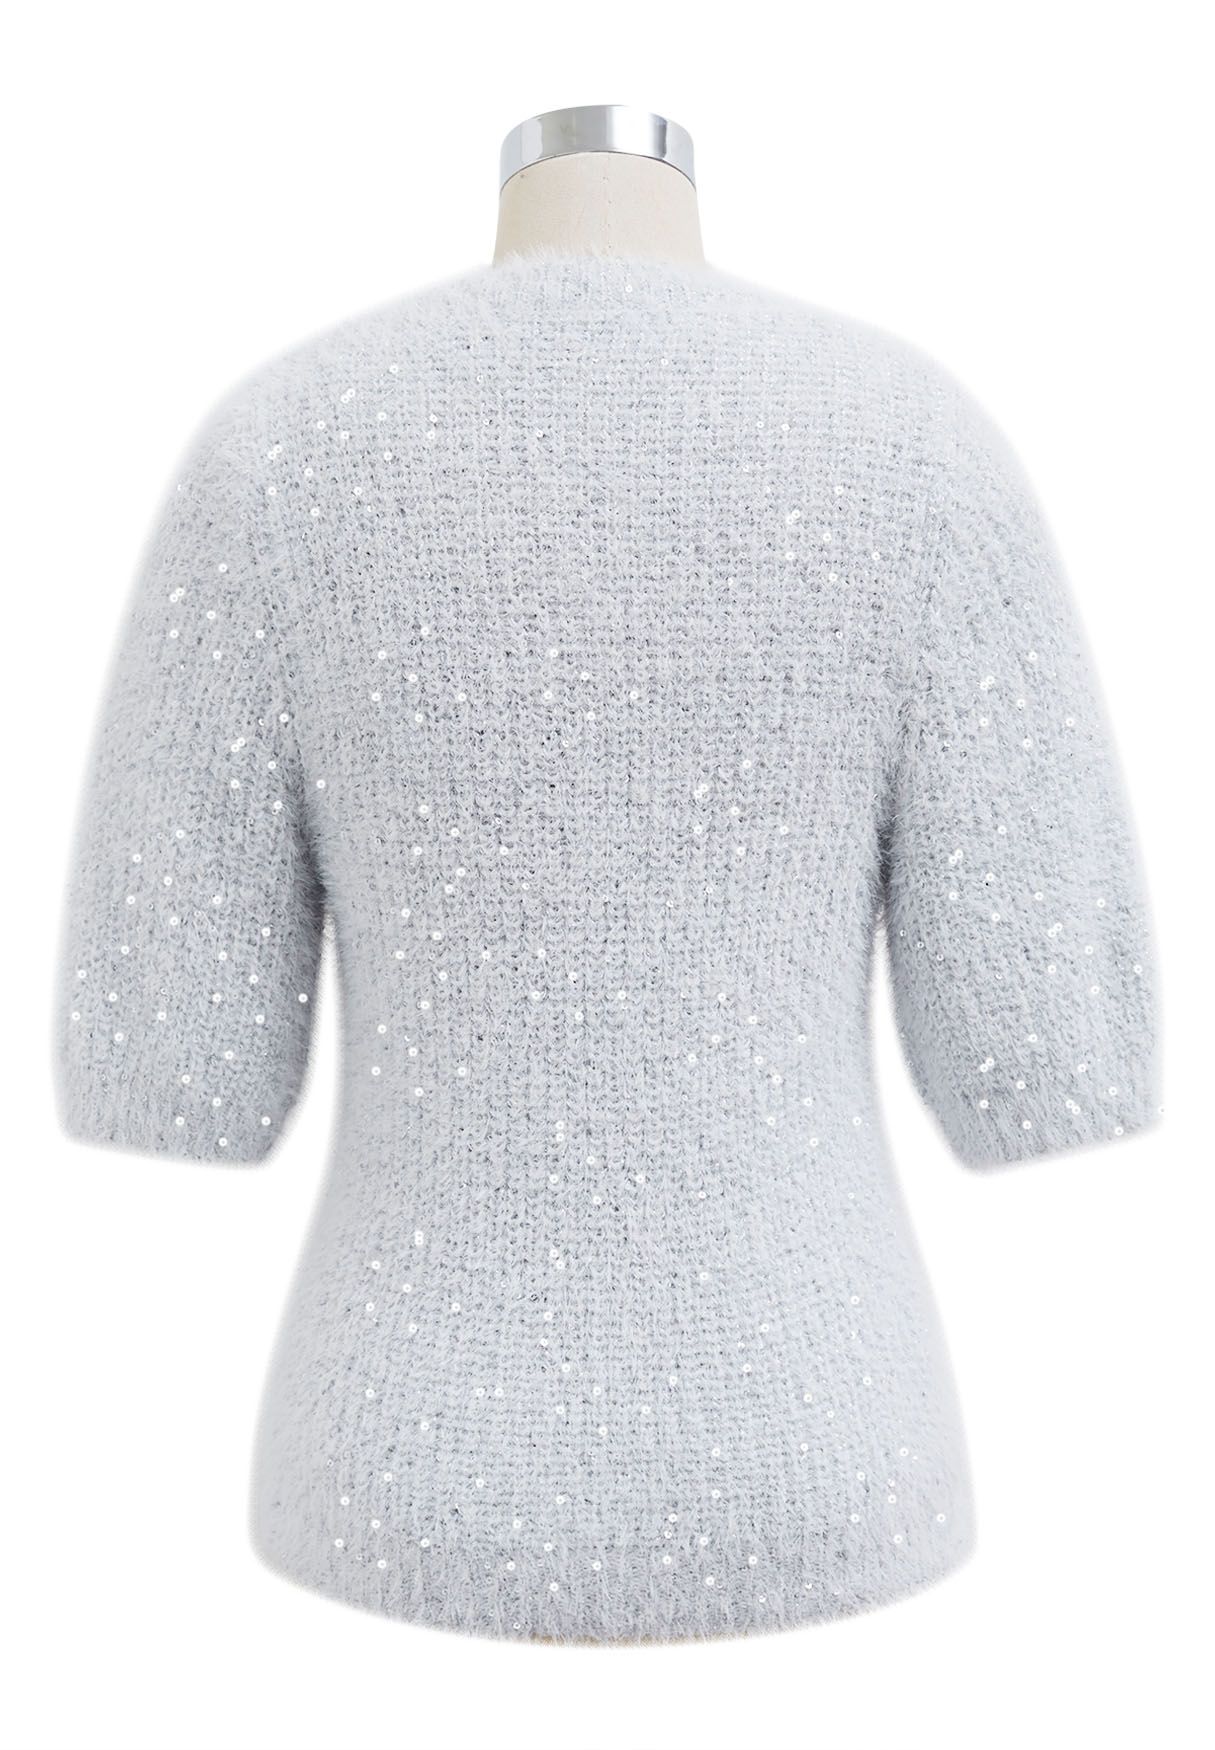 Sequin Fuzzy Short Sleeve Sweater in Silver